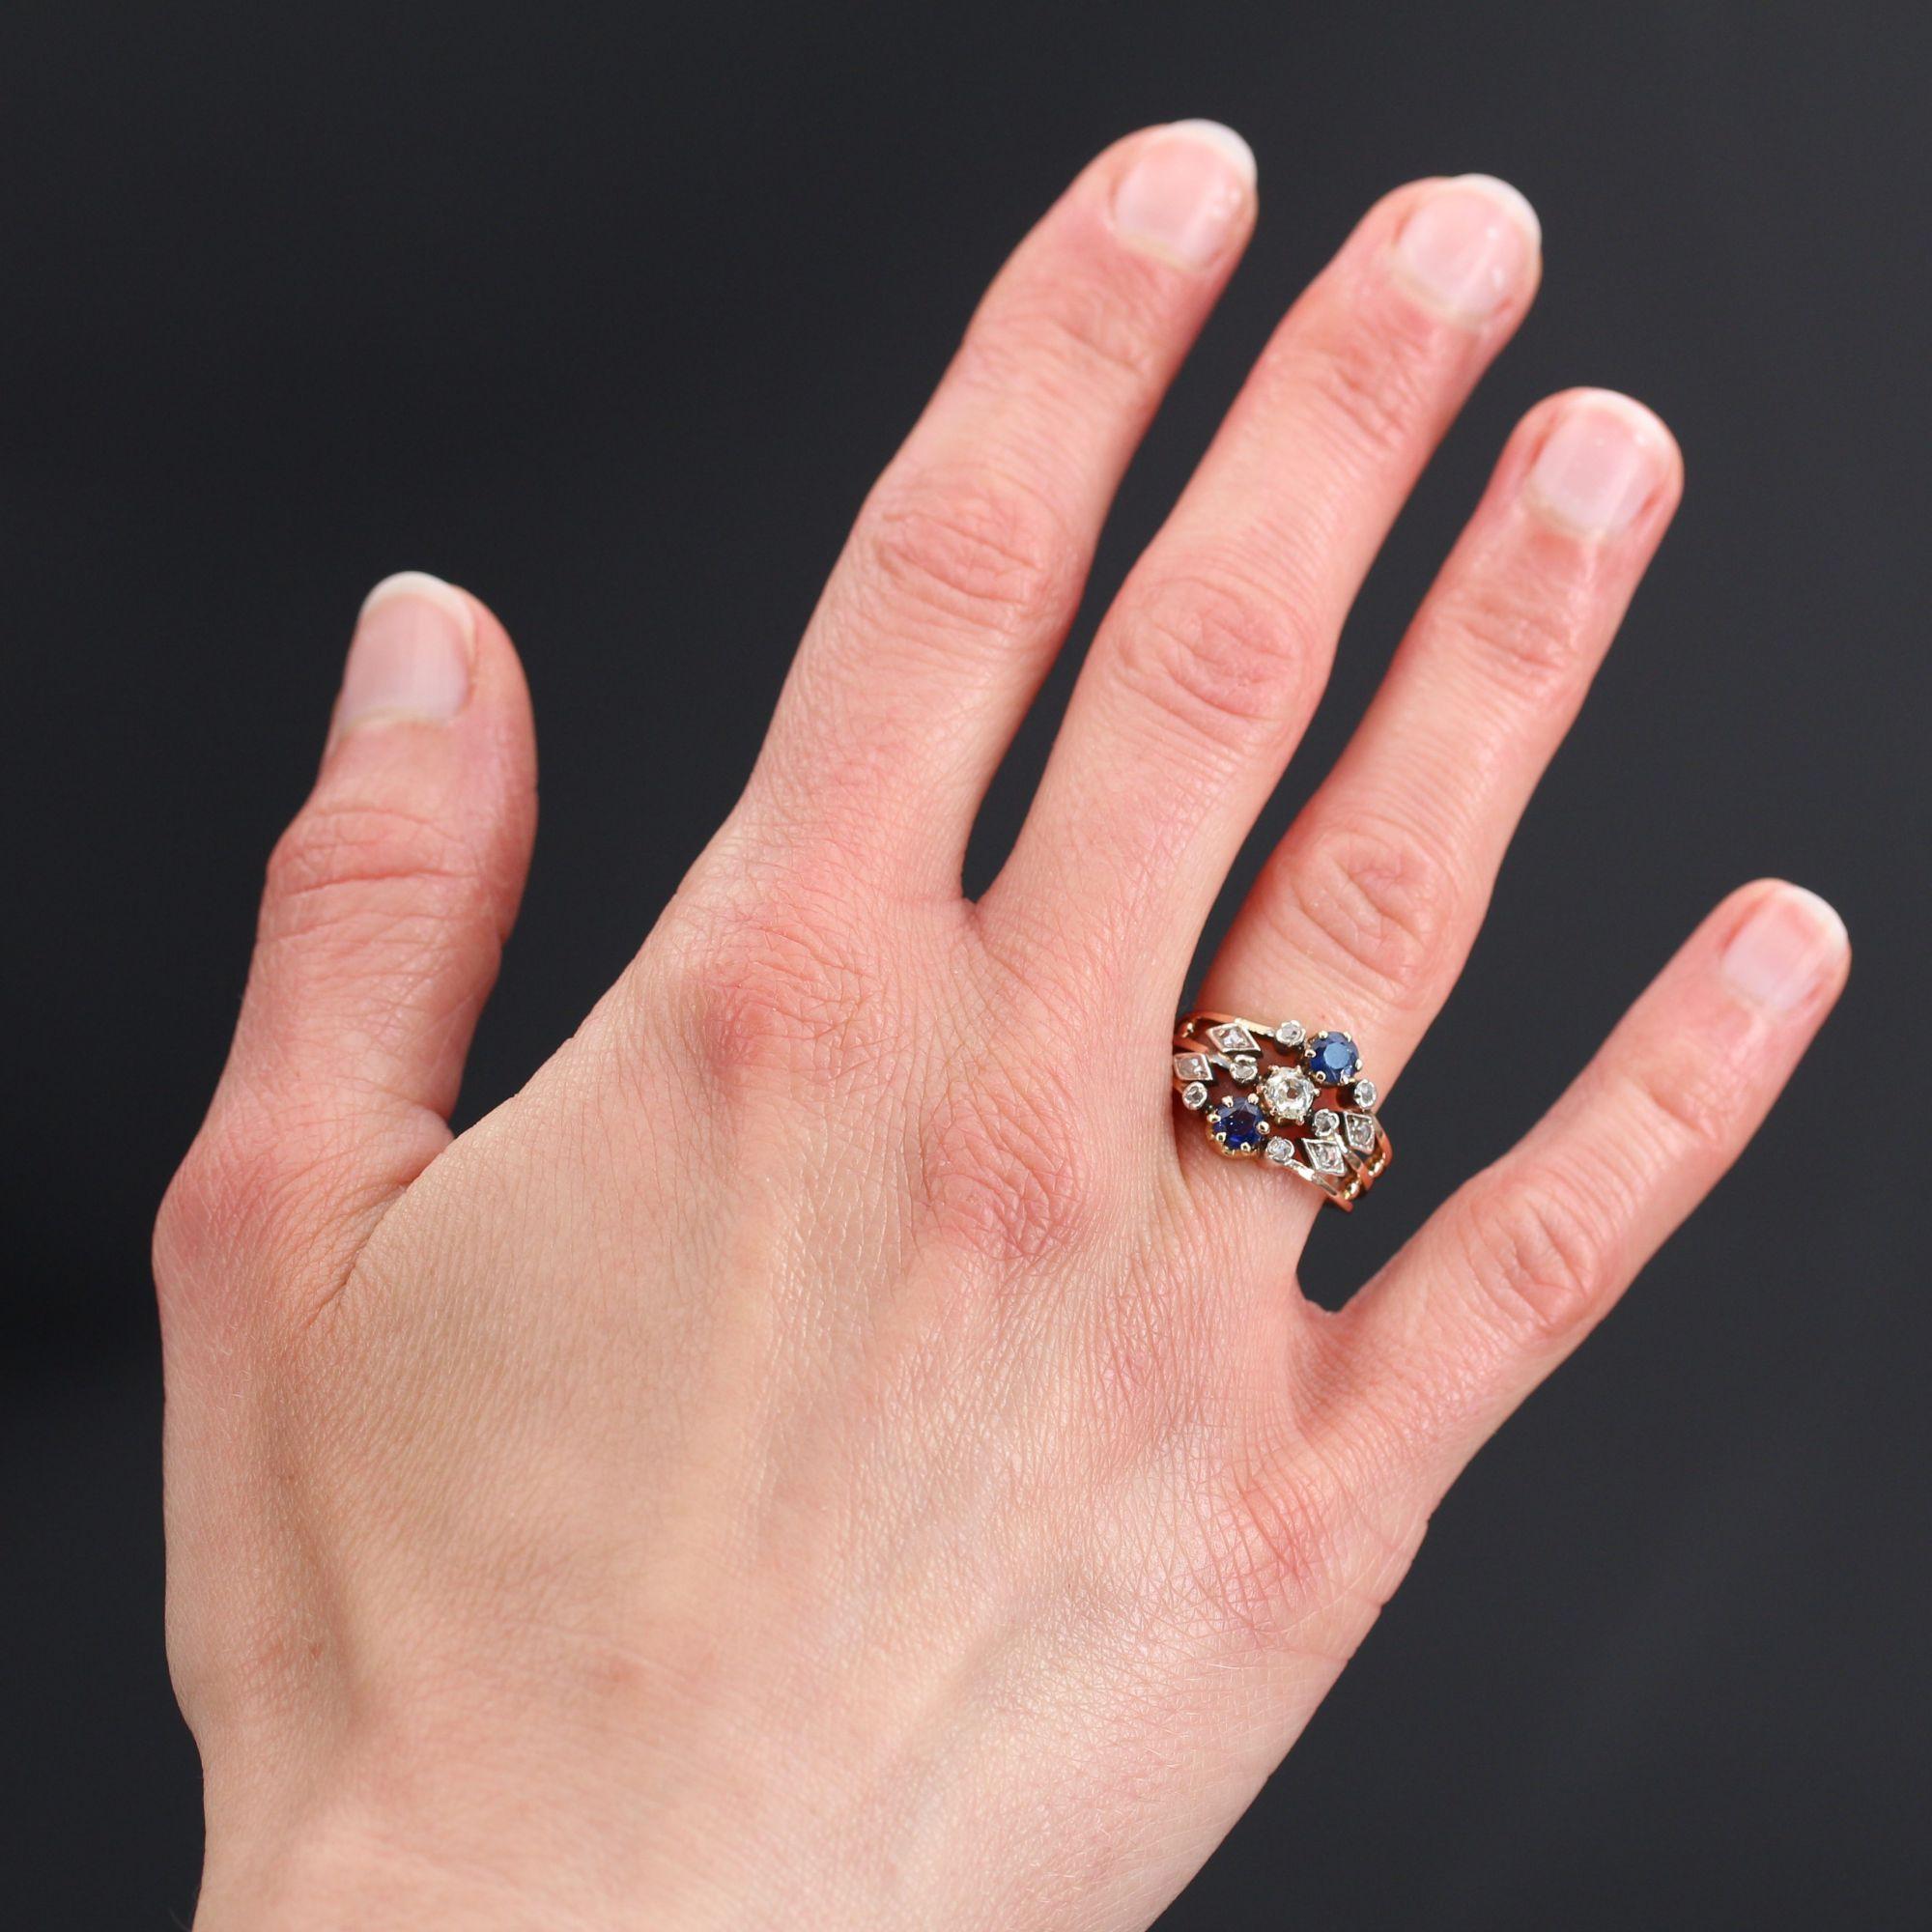 Ring in 18 karat rose gold.
Sublime and authentic antique ring, it is set on 3 openwork rings, two round sapphires and a cushion- cut diamond. On both sides, on each of the rings, is set a rose-cut diamond and two lozenge patterns set with rose-cut